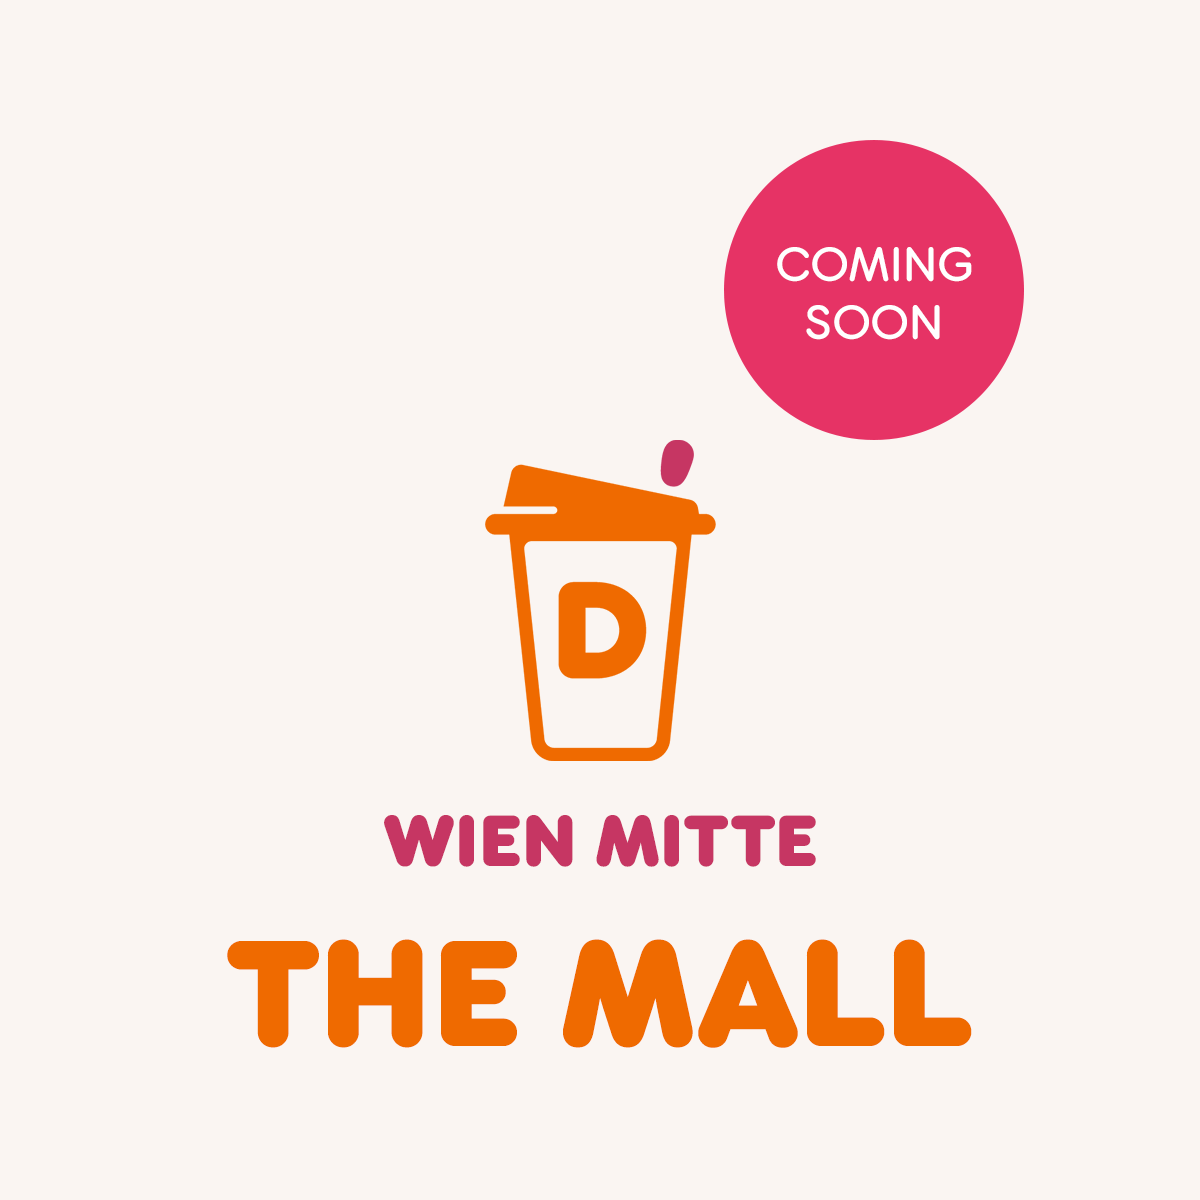 WIEN MITTE THE MALL COMING SOON